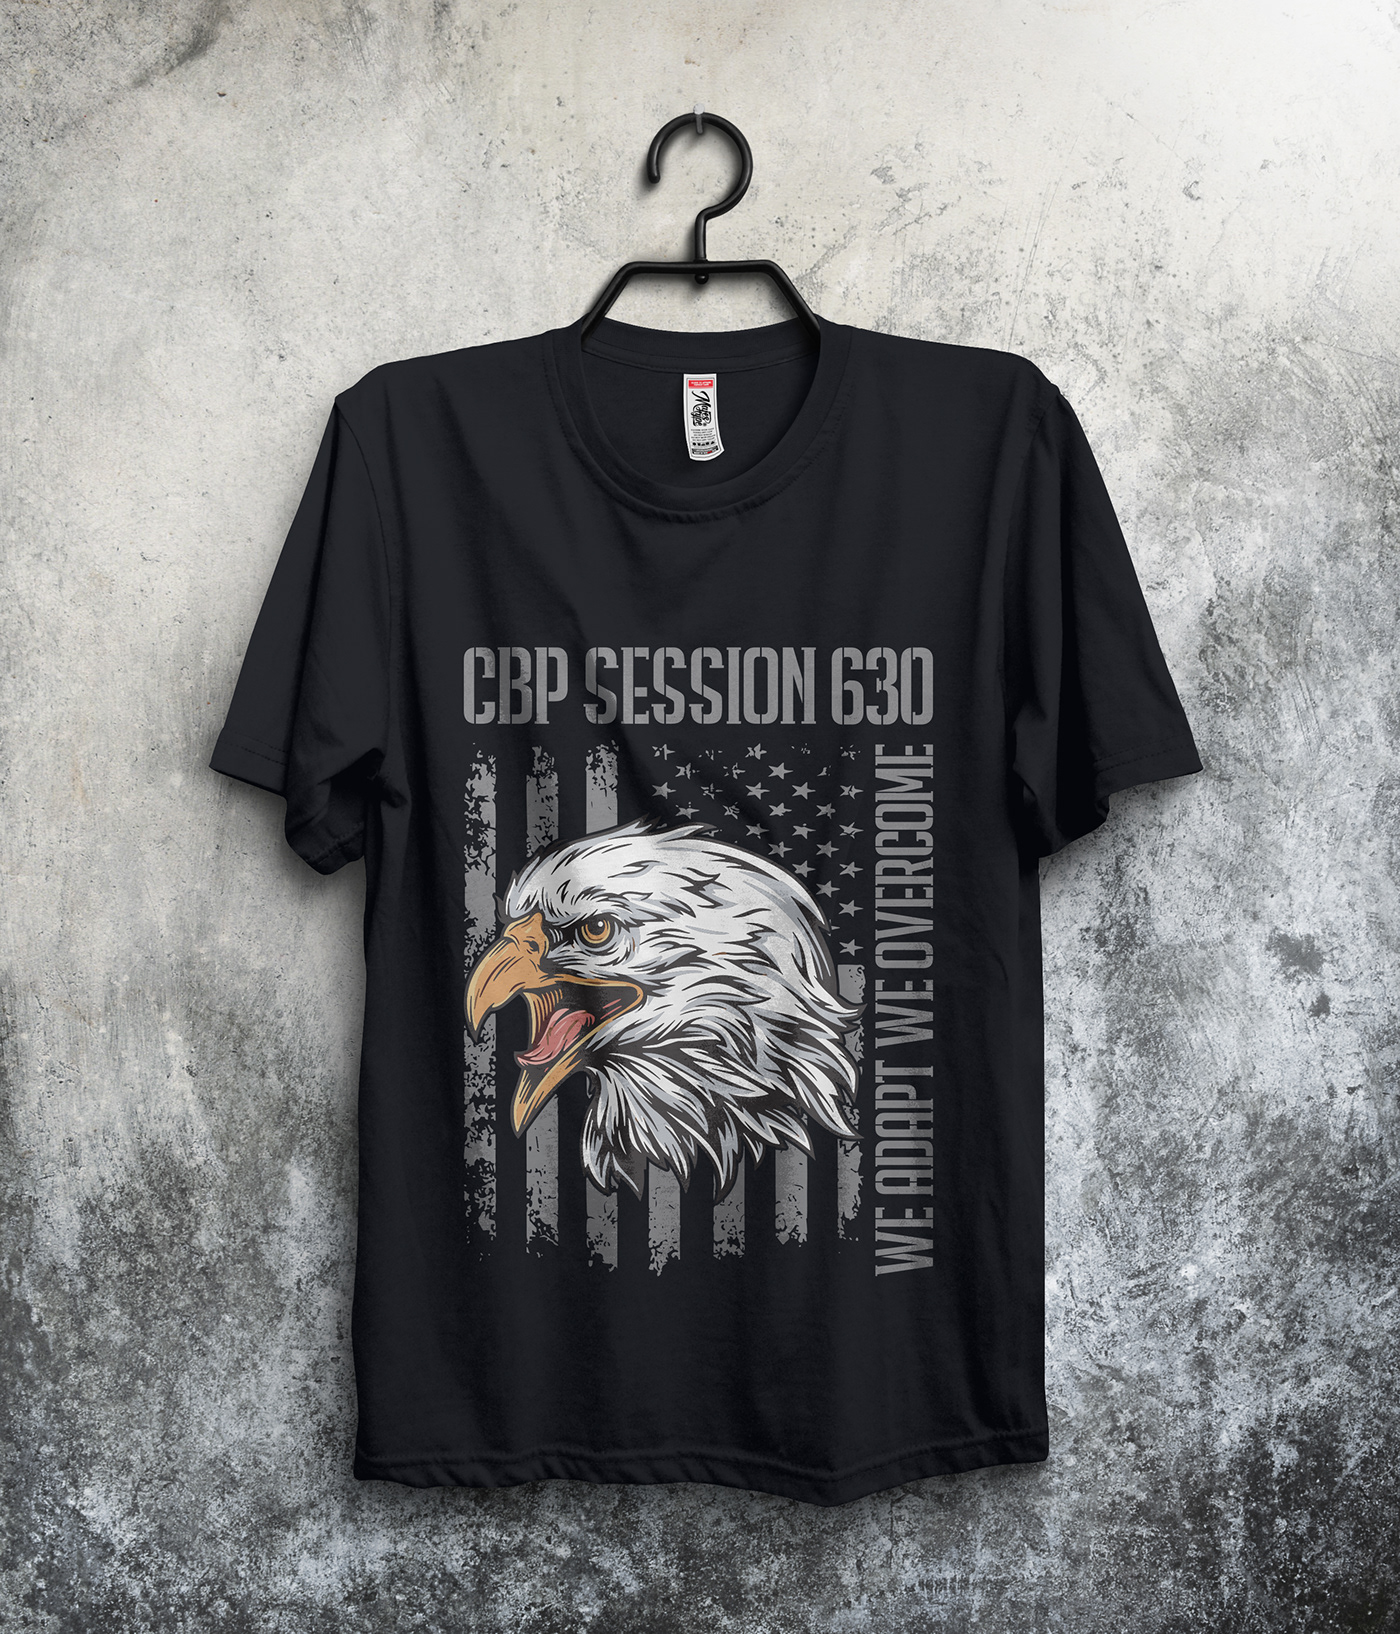 America And American T-shirt Designs
Please your order now to take the first step toward a remarkabl